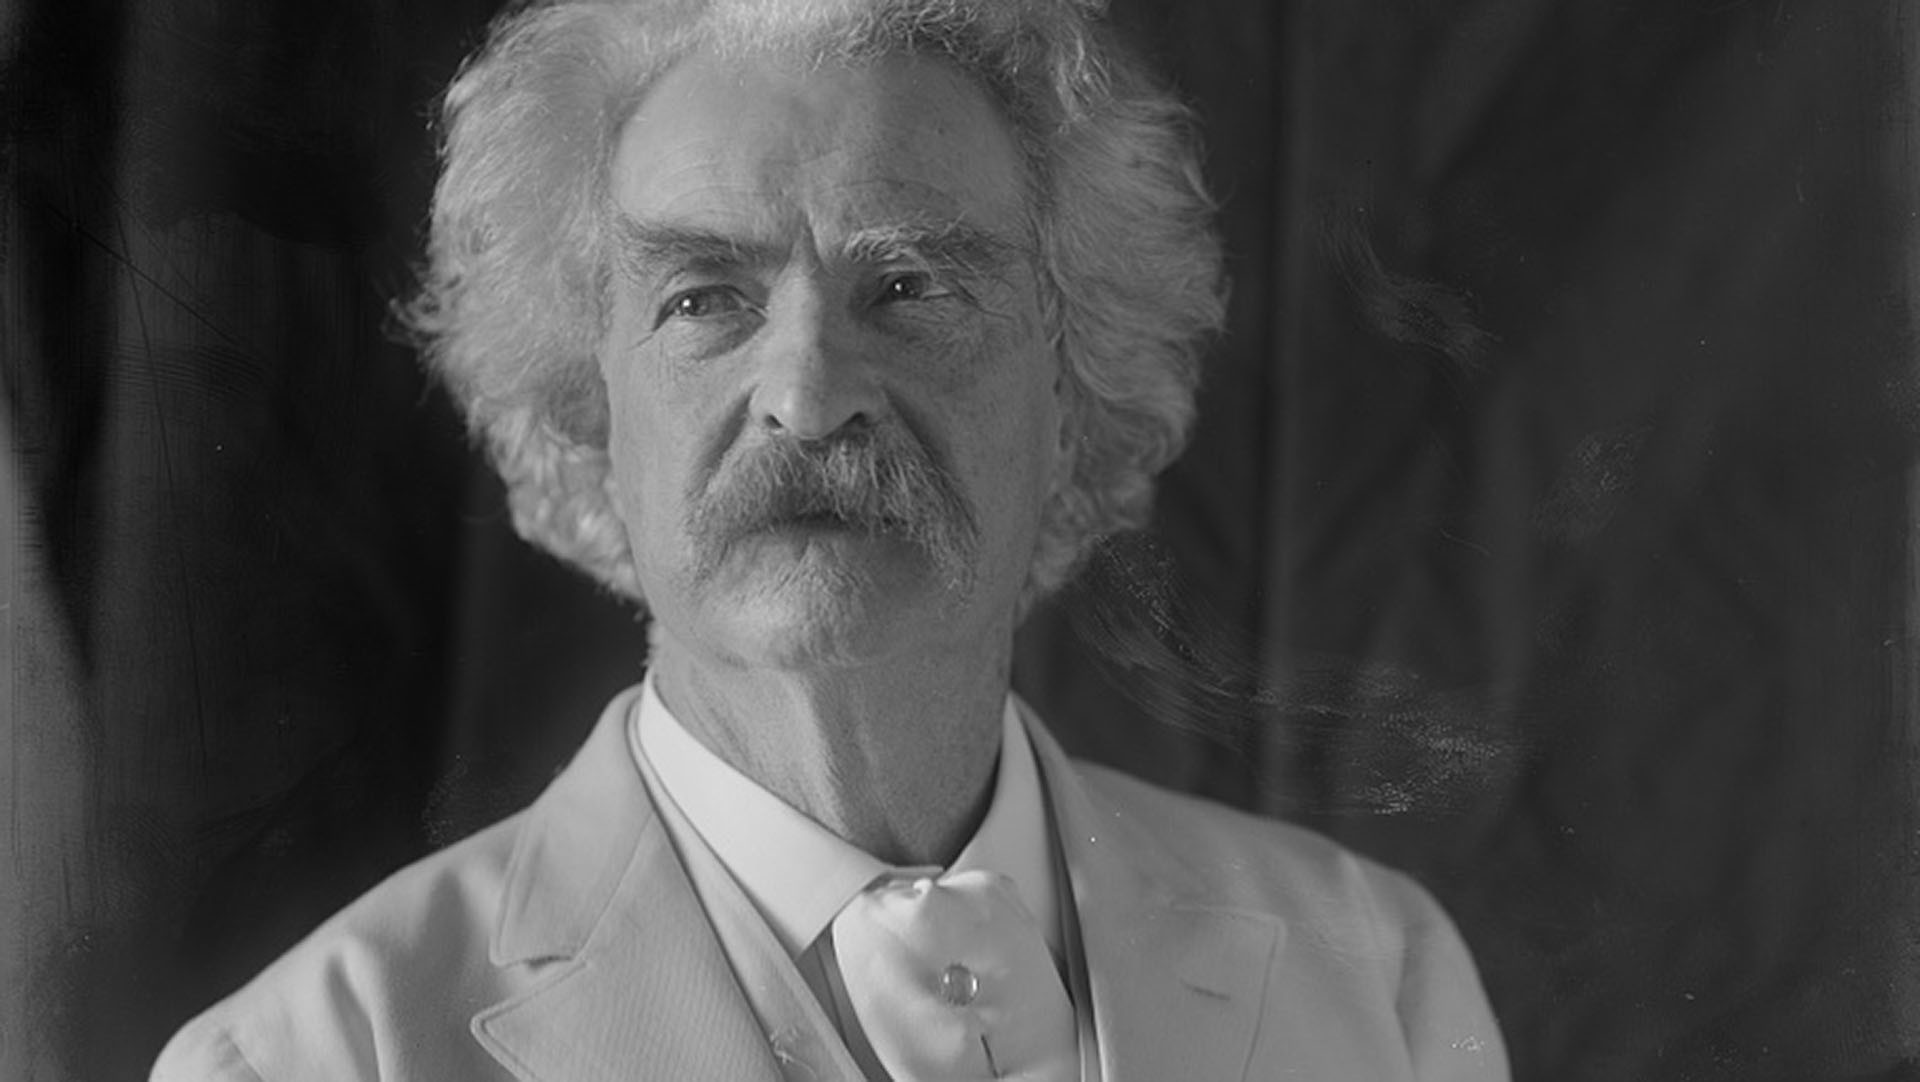 Mark Twain in a white suit, 1906